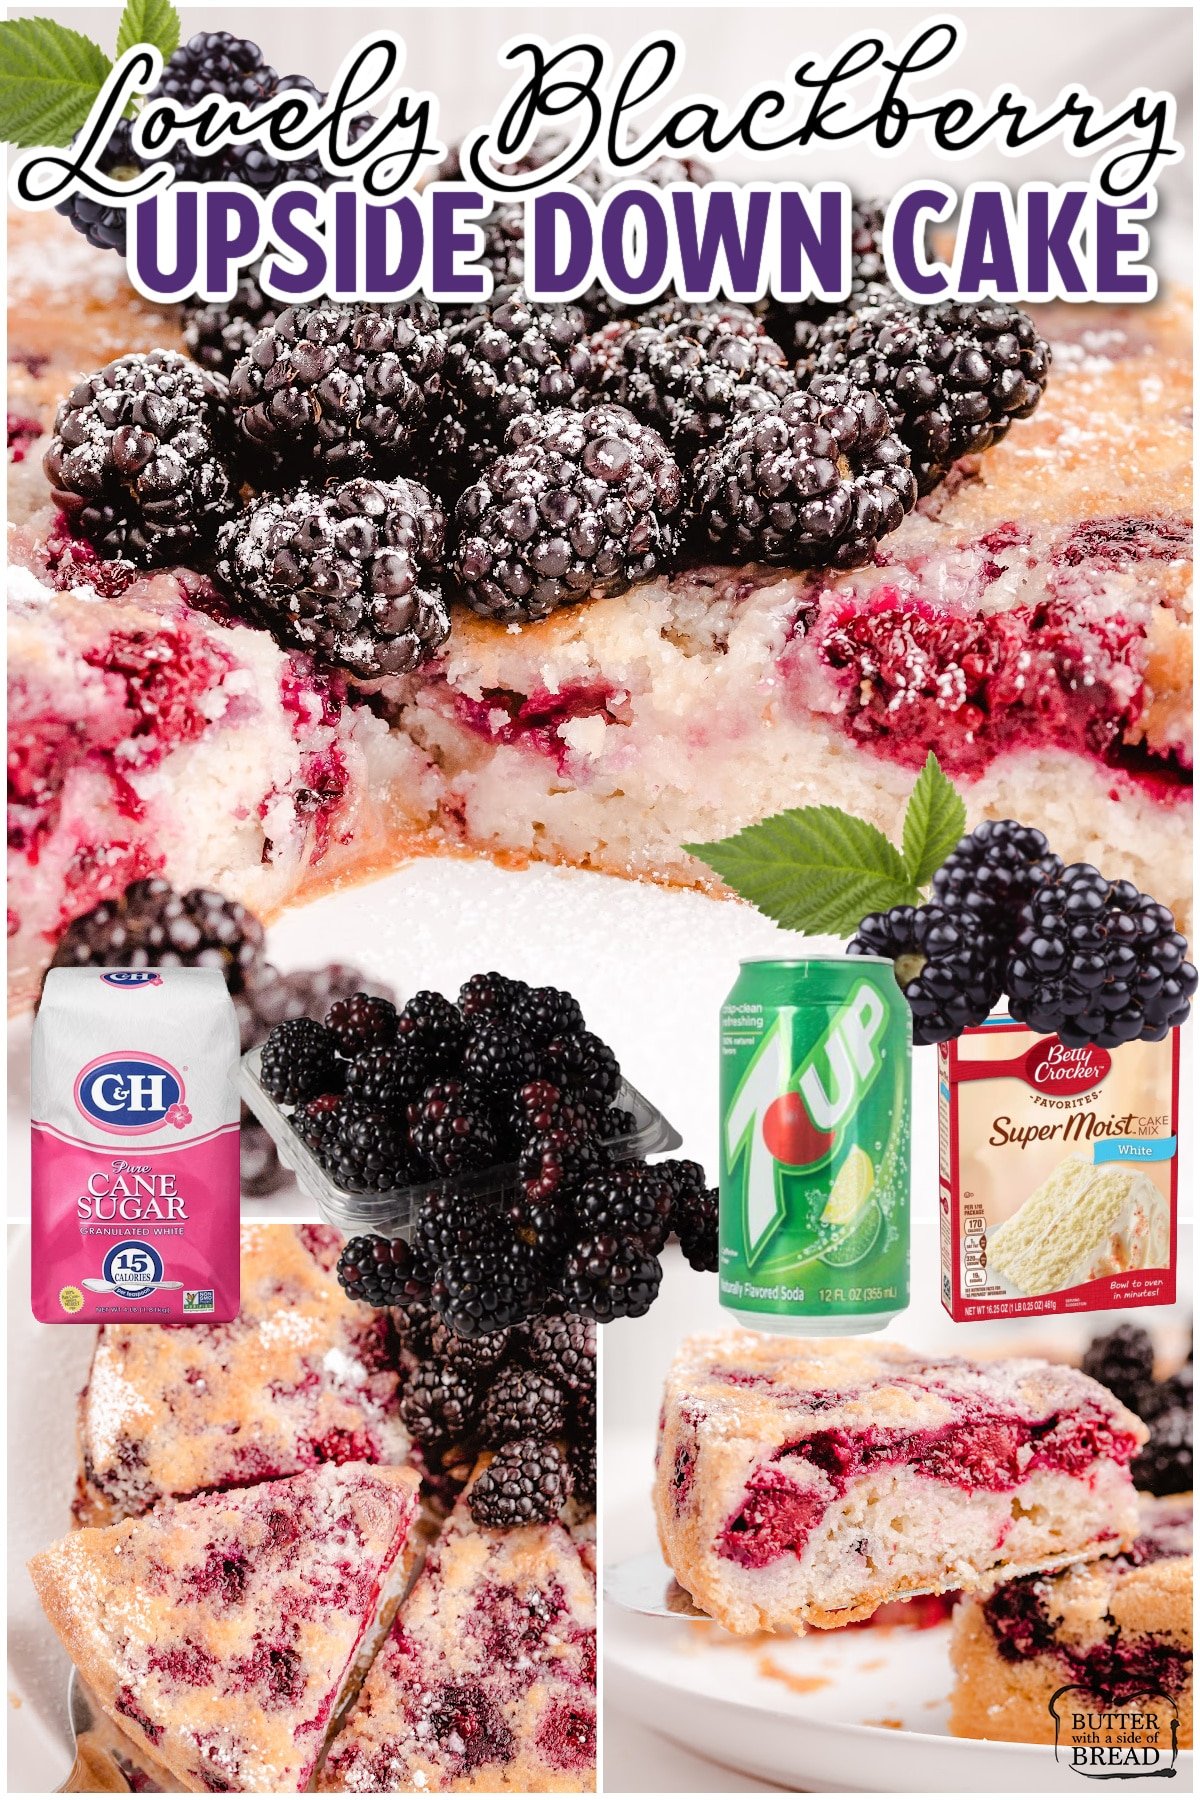 Blackberry Upside down Cake is a delightfully simple blackberry dessert made with just 4 ingredients! This berry cake with cake mix is made easy in minutes & has incredible flavor.